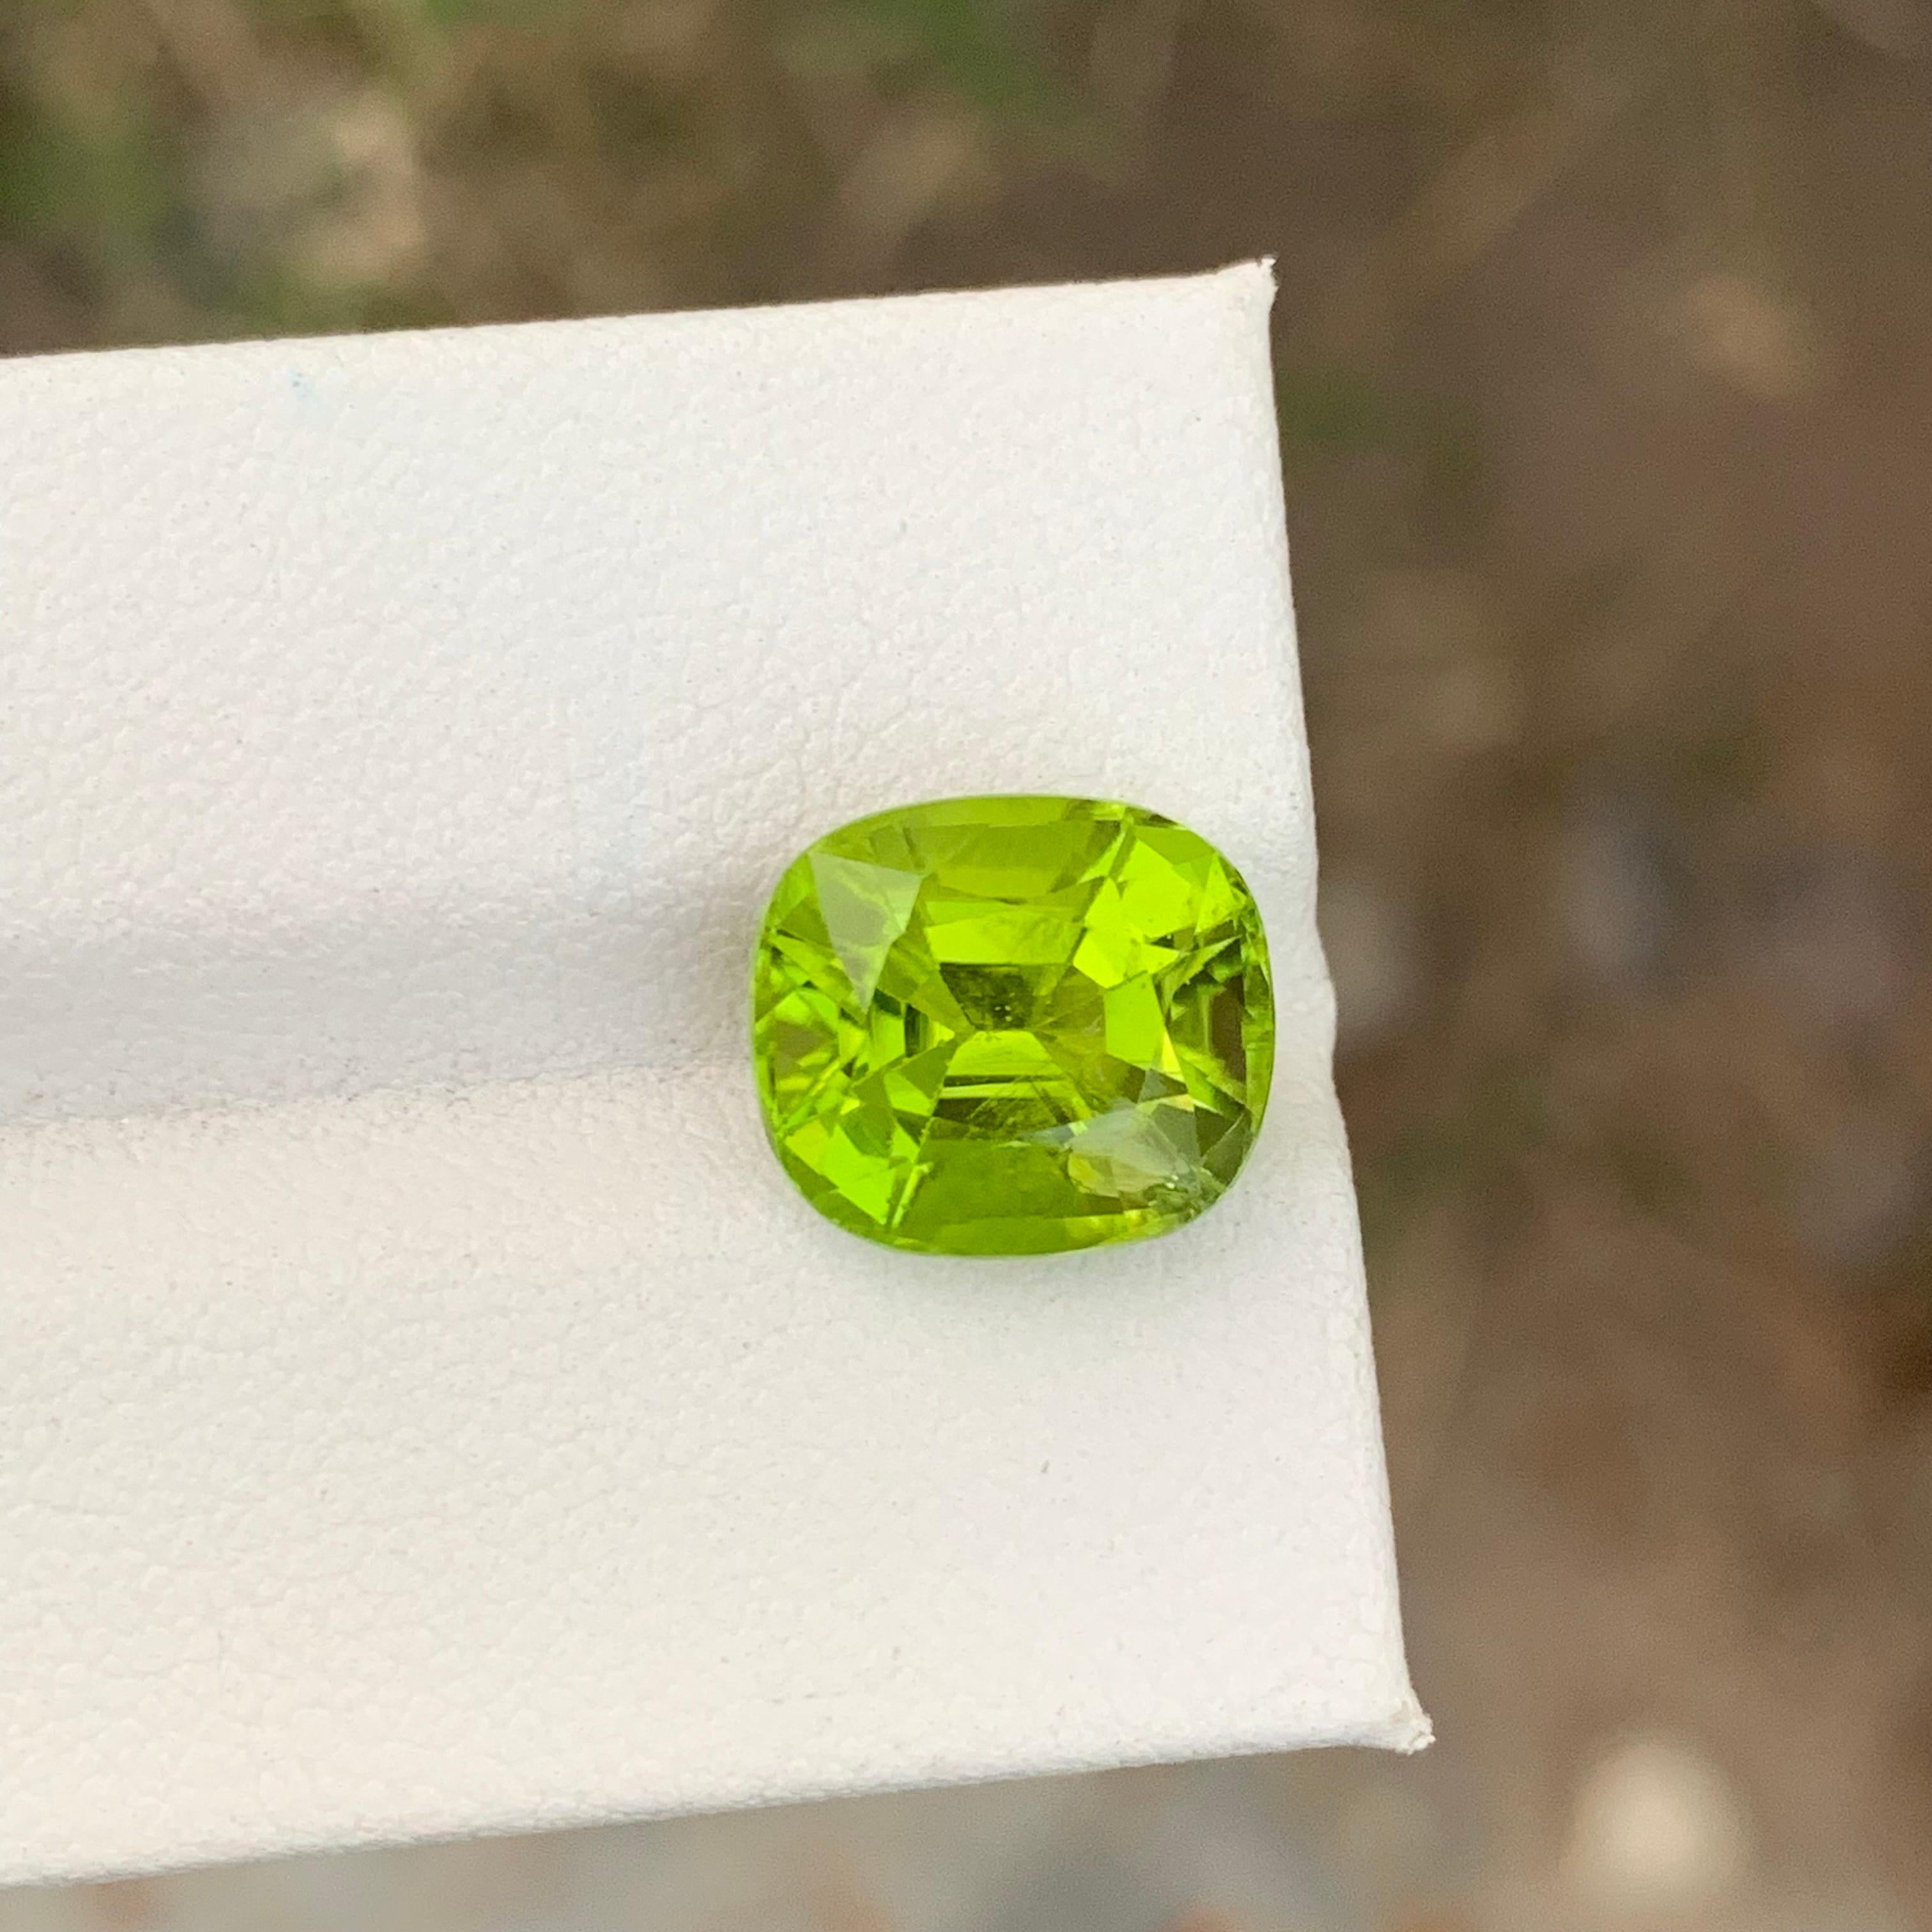 Stunning Natural Faceted Green Peridot Ring Gemstone 6.05 Carats  For Sale 8